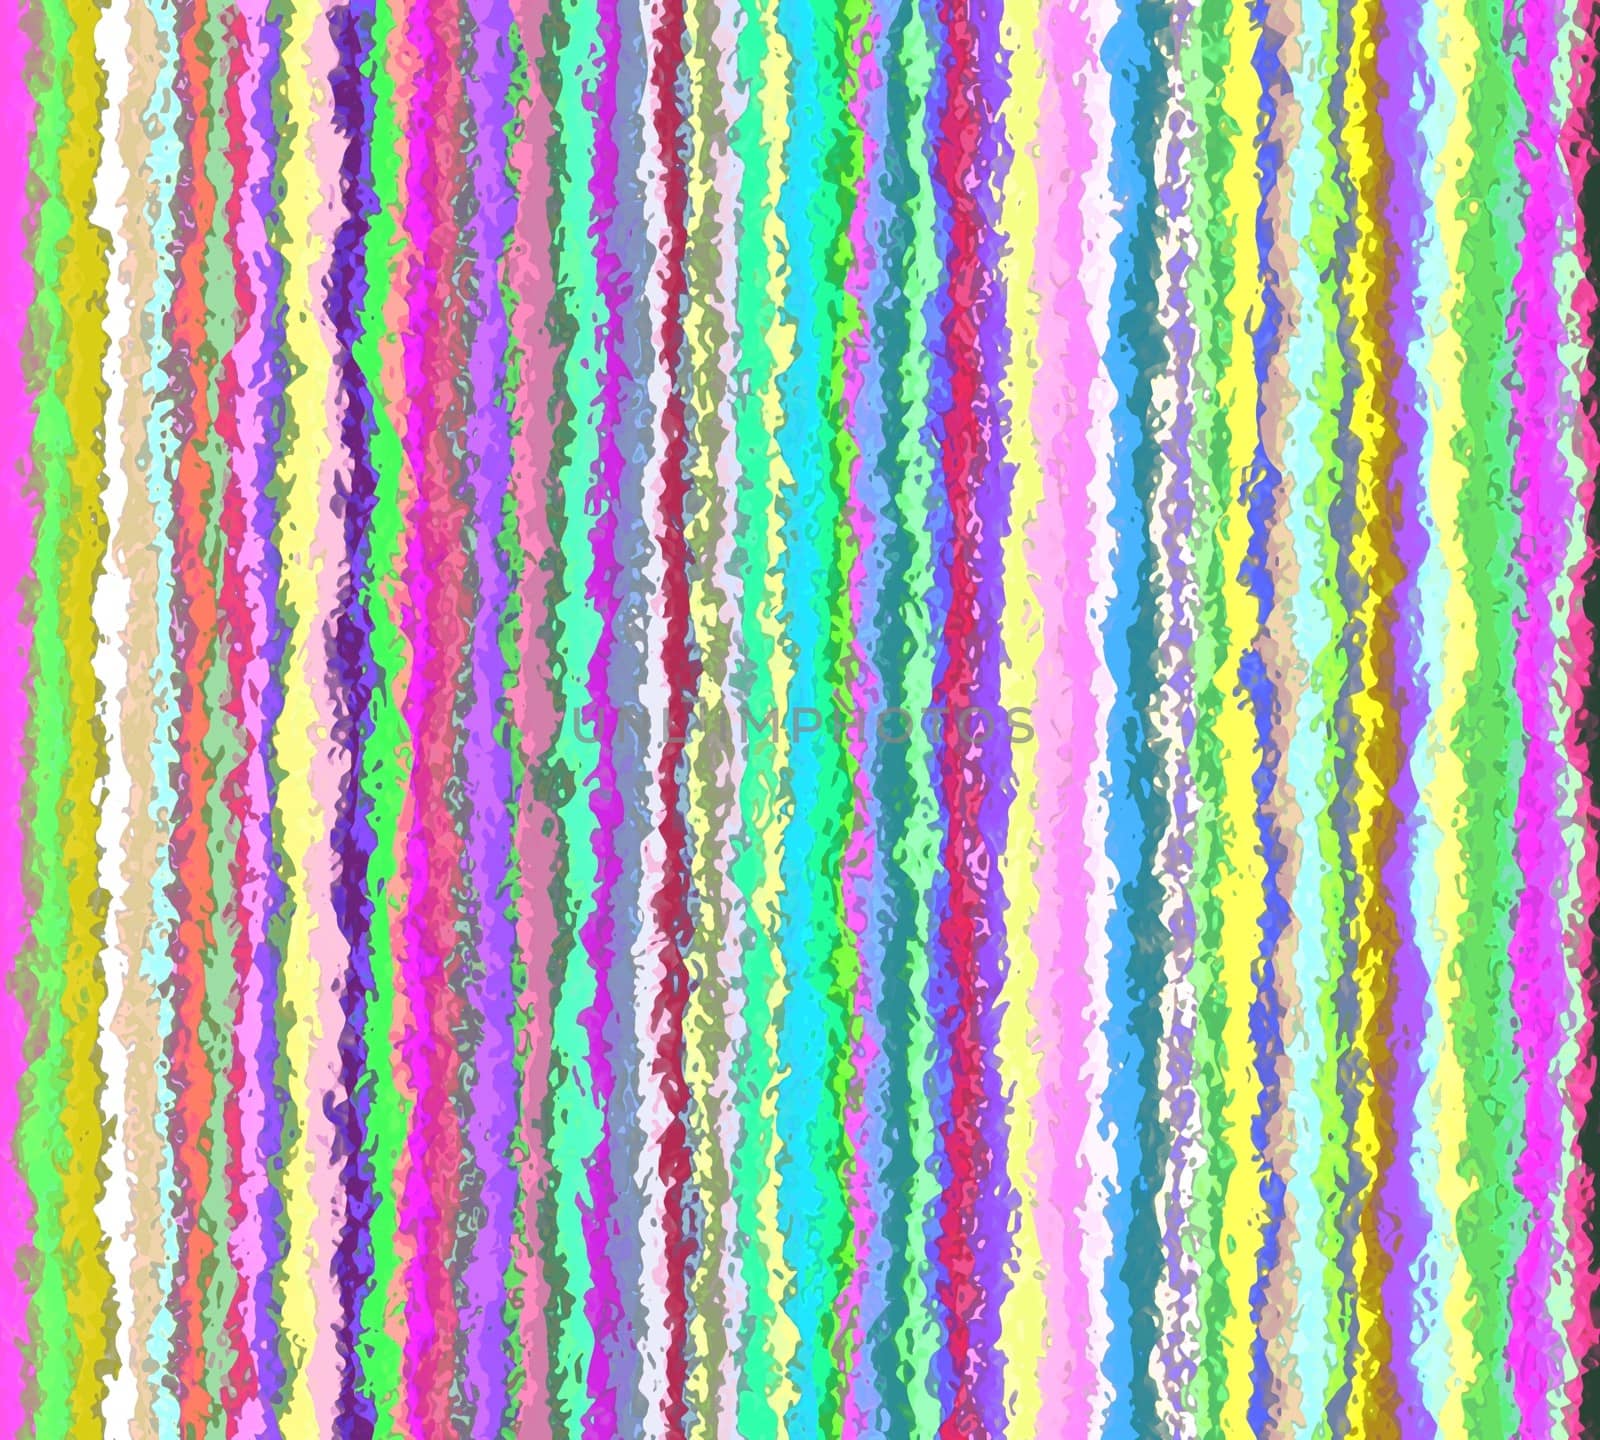 Illustration of vertical colorful jagged lines